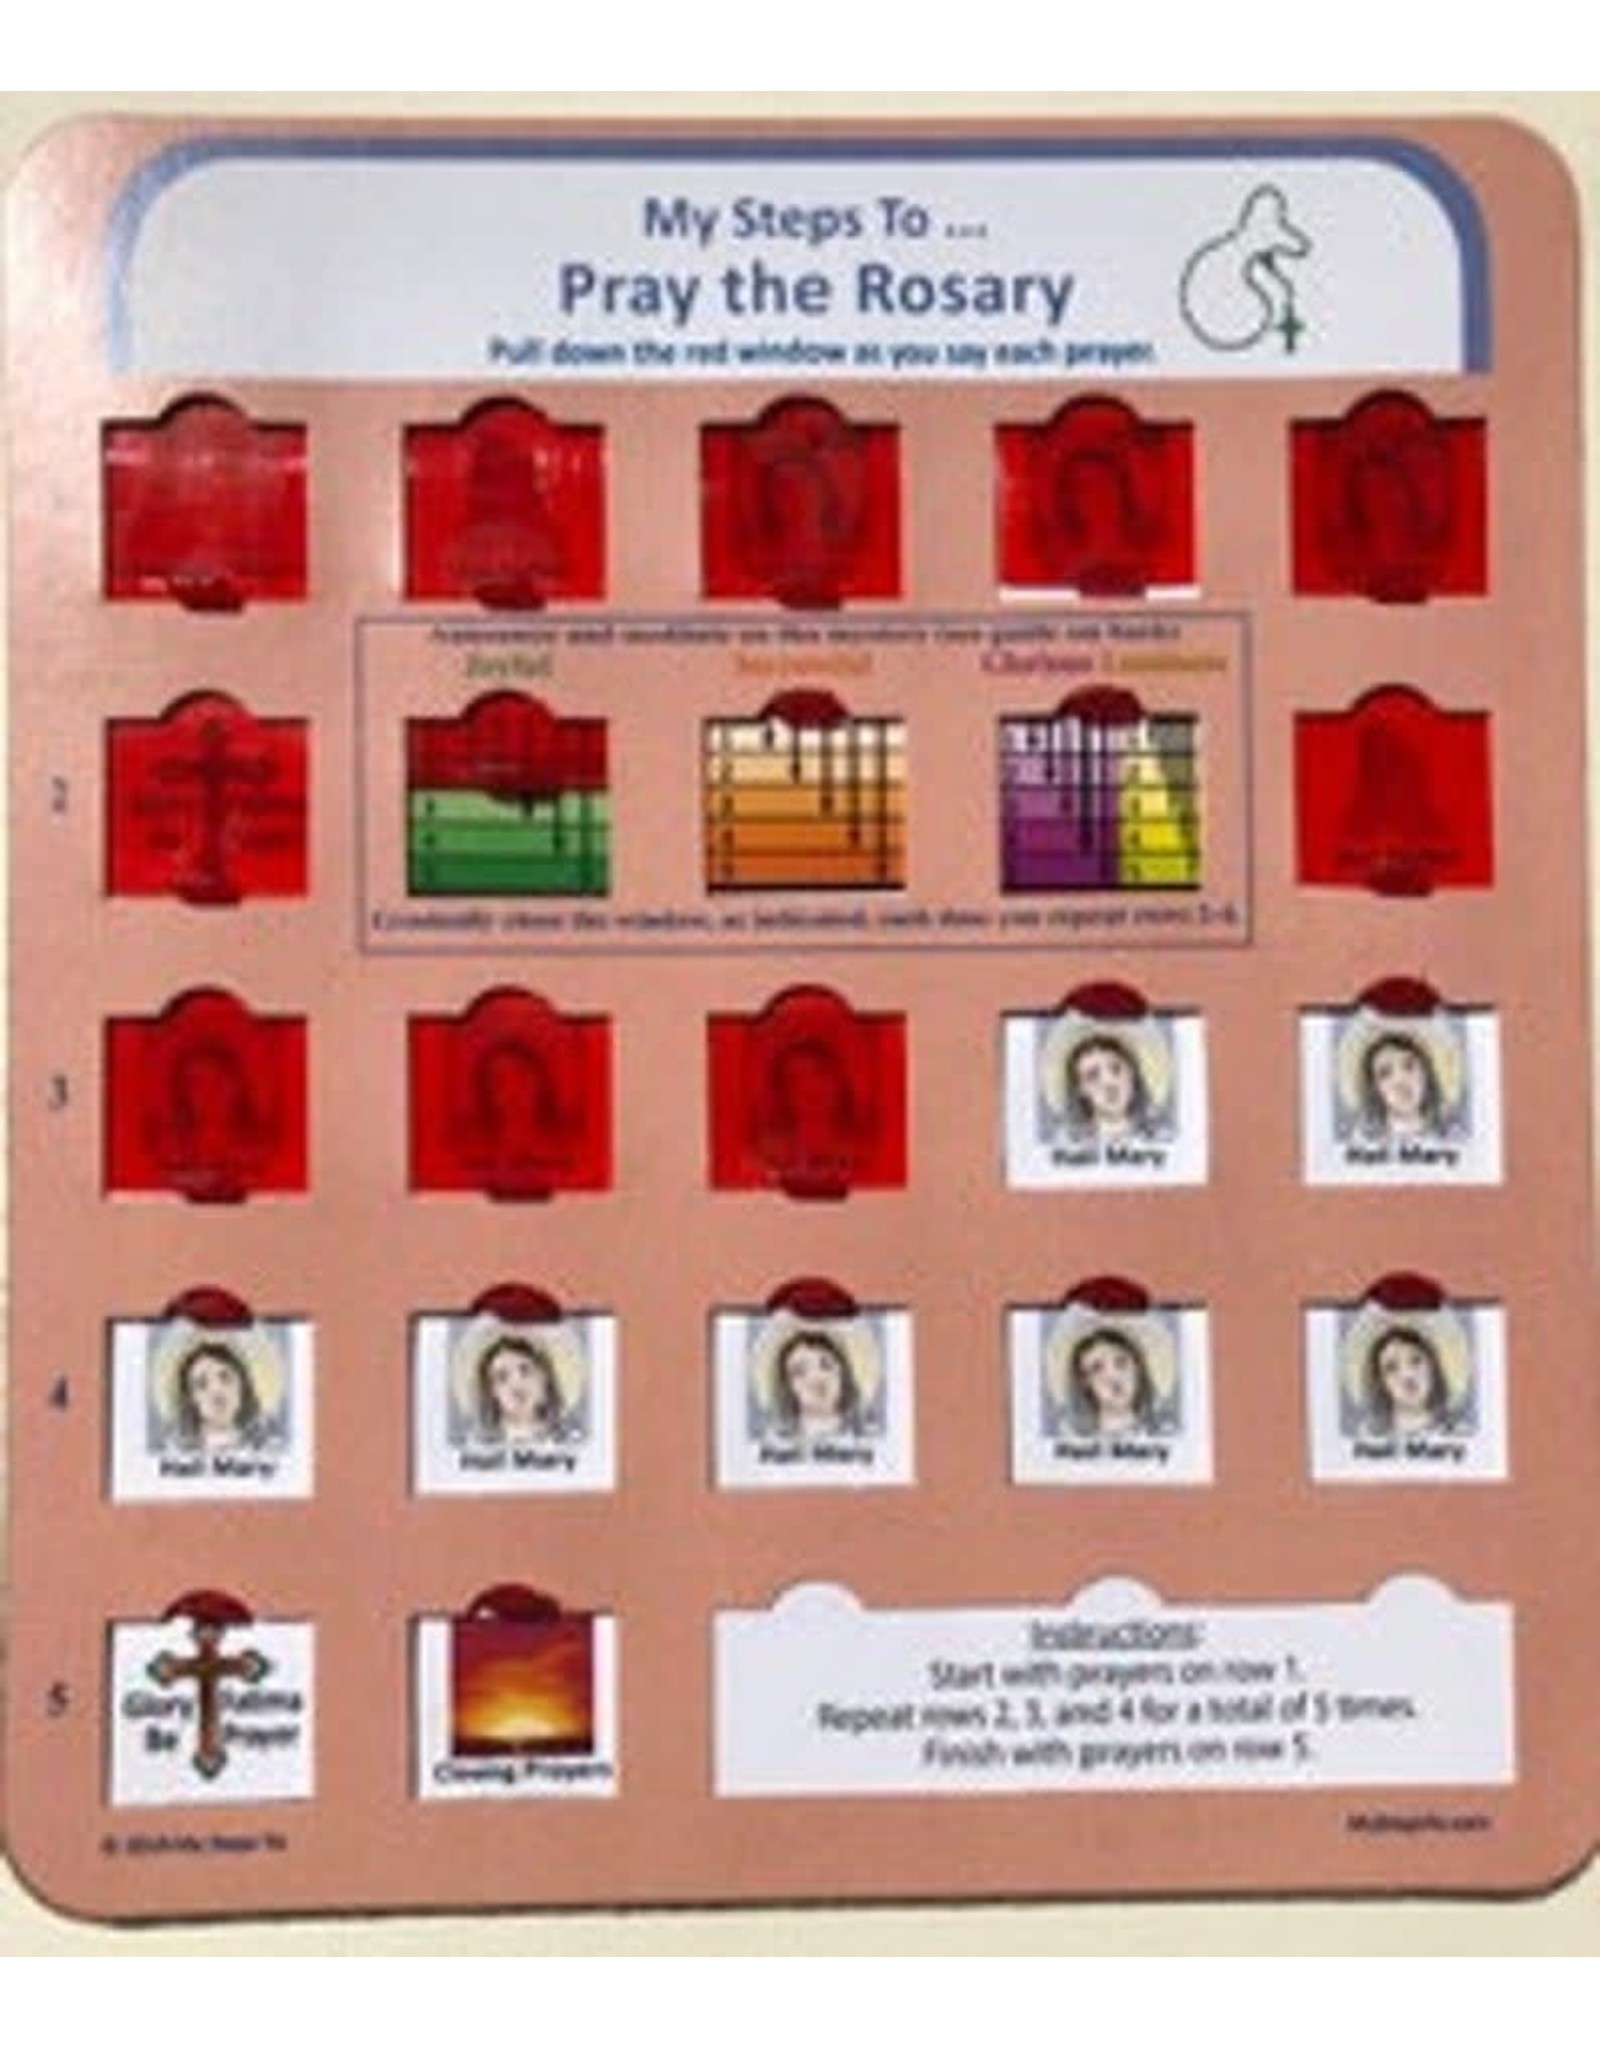 My Guide to Pray the Rosary (with pull-down sliders)